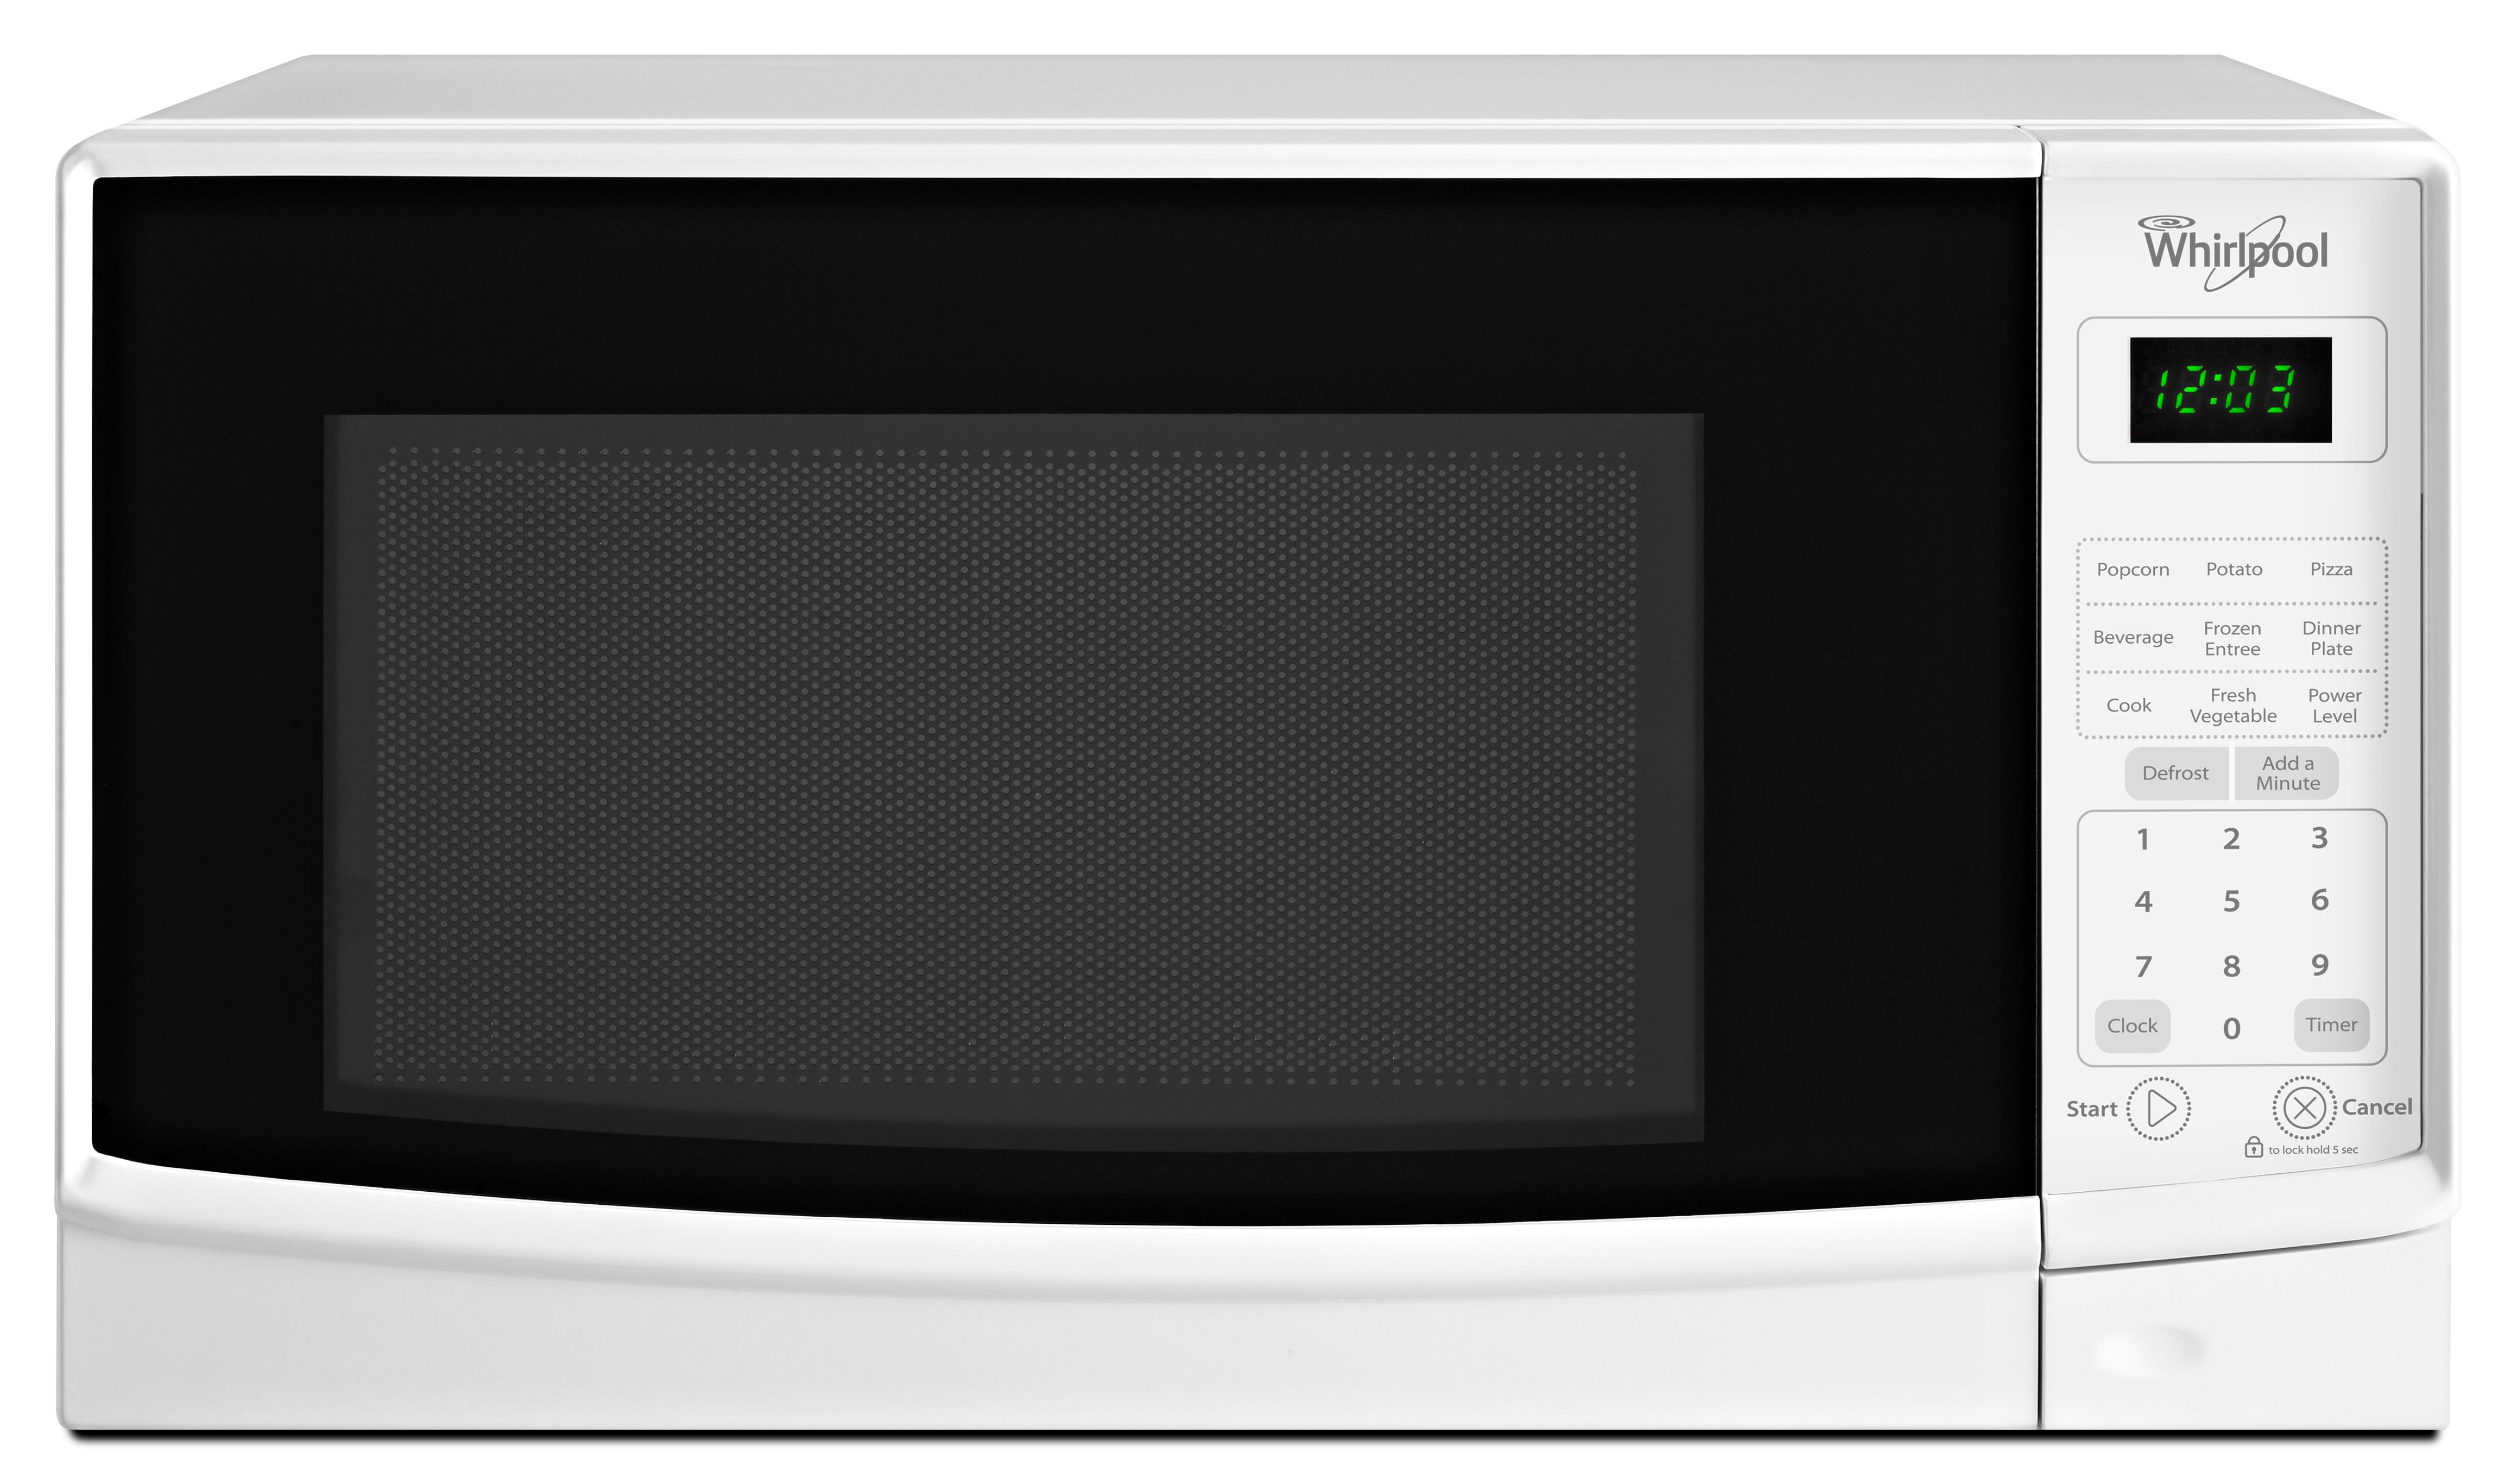 Whirlpool 0 7 Cu Ft Under The Cabinet Microwave Oven White